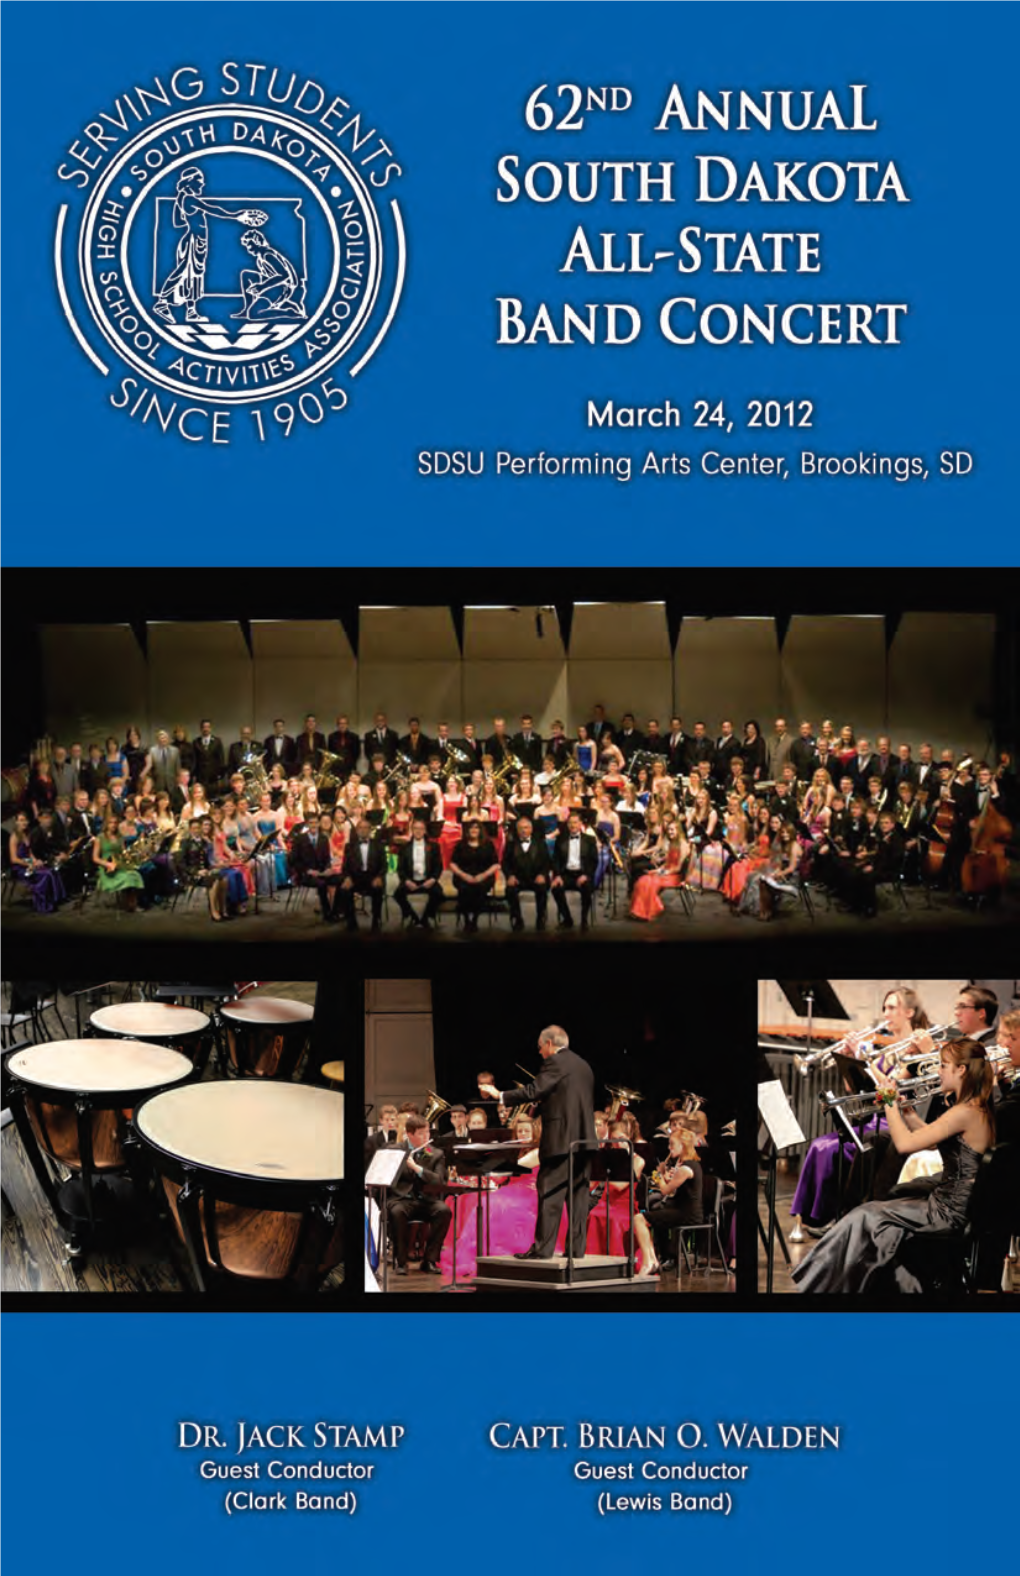 Concerts with the South Dakota High School Activities Association